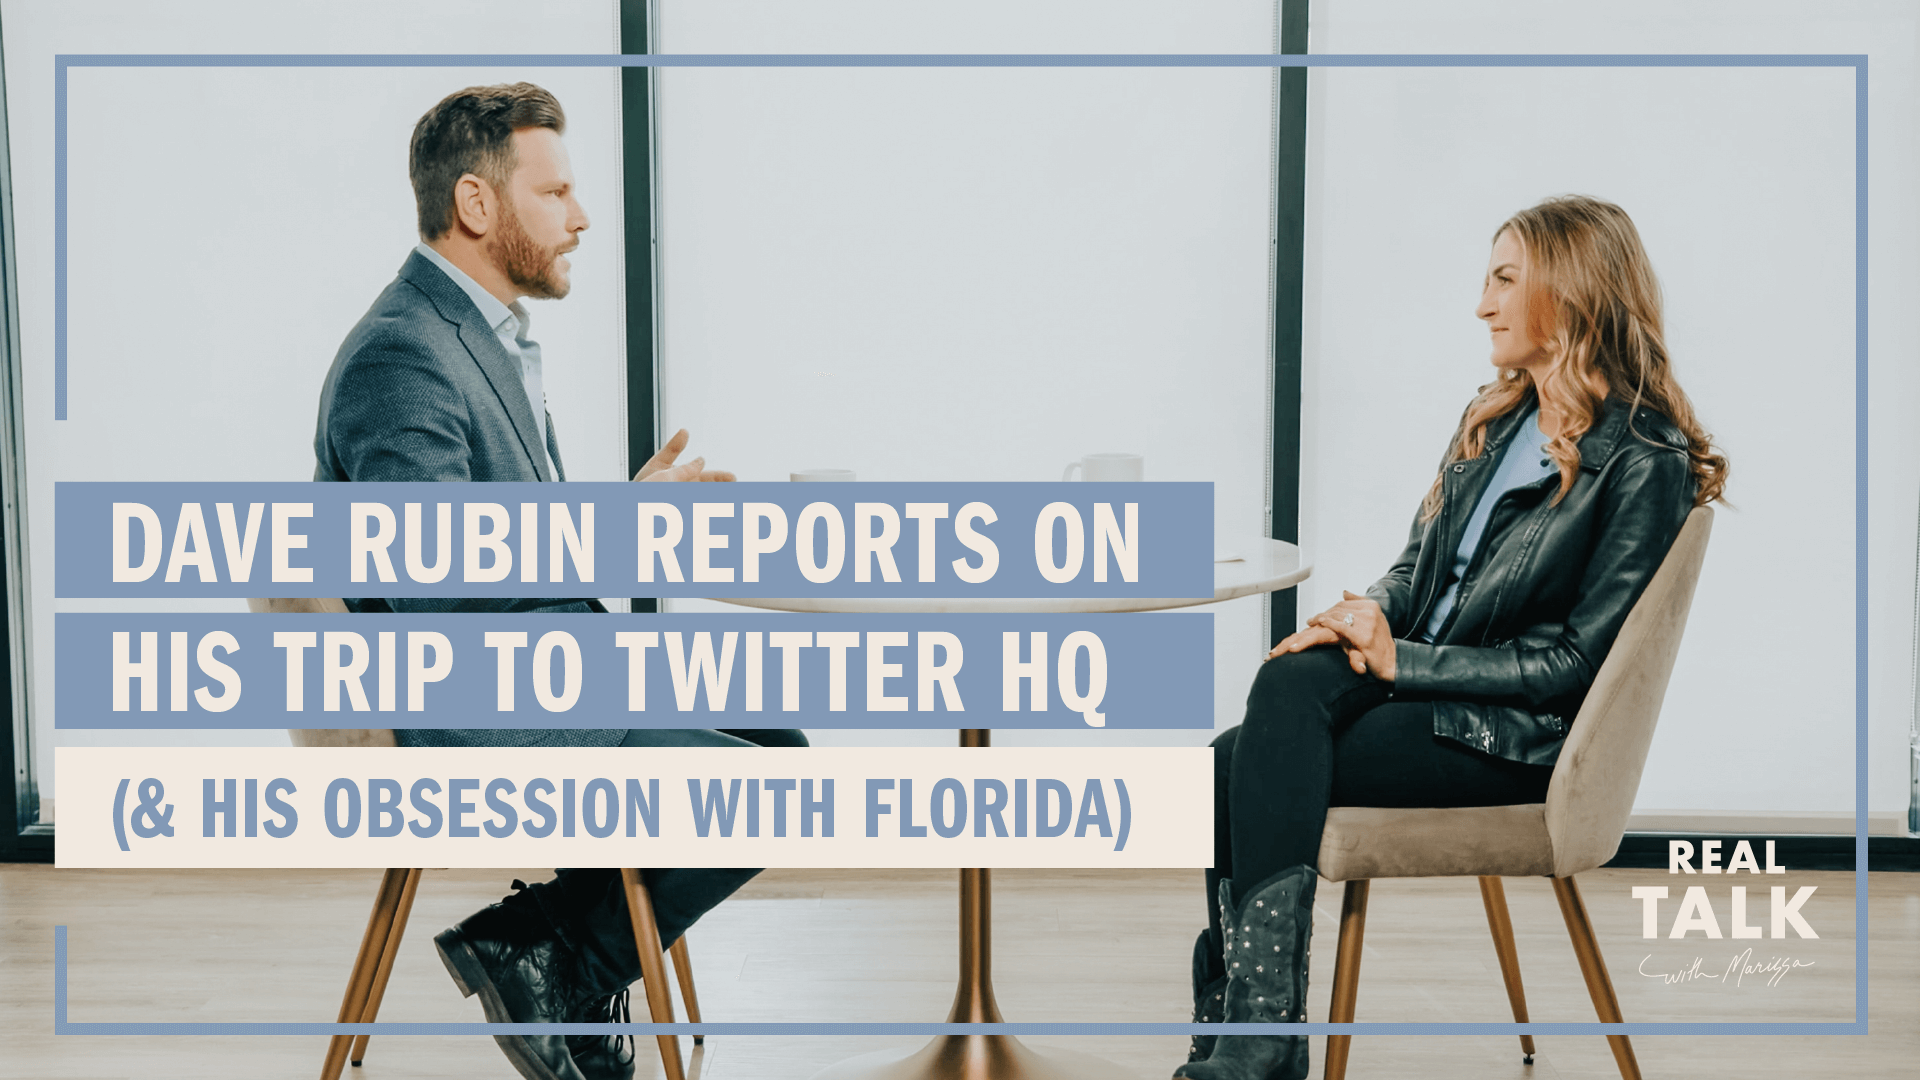 Dave Rubin Reports on His Trip to Twitter HQ (& His Obsession with Florida)